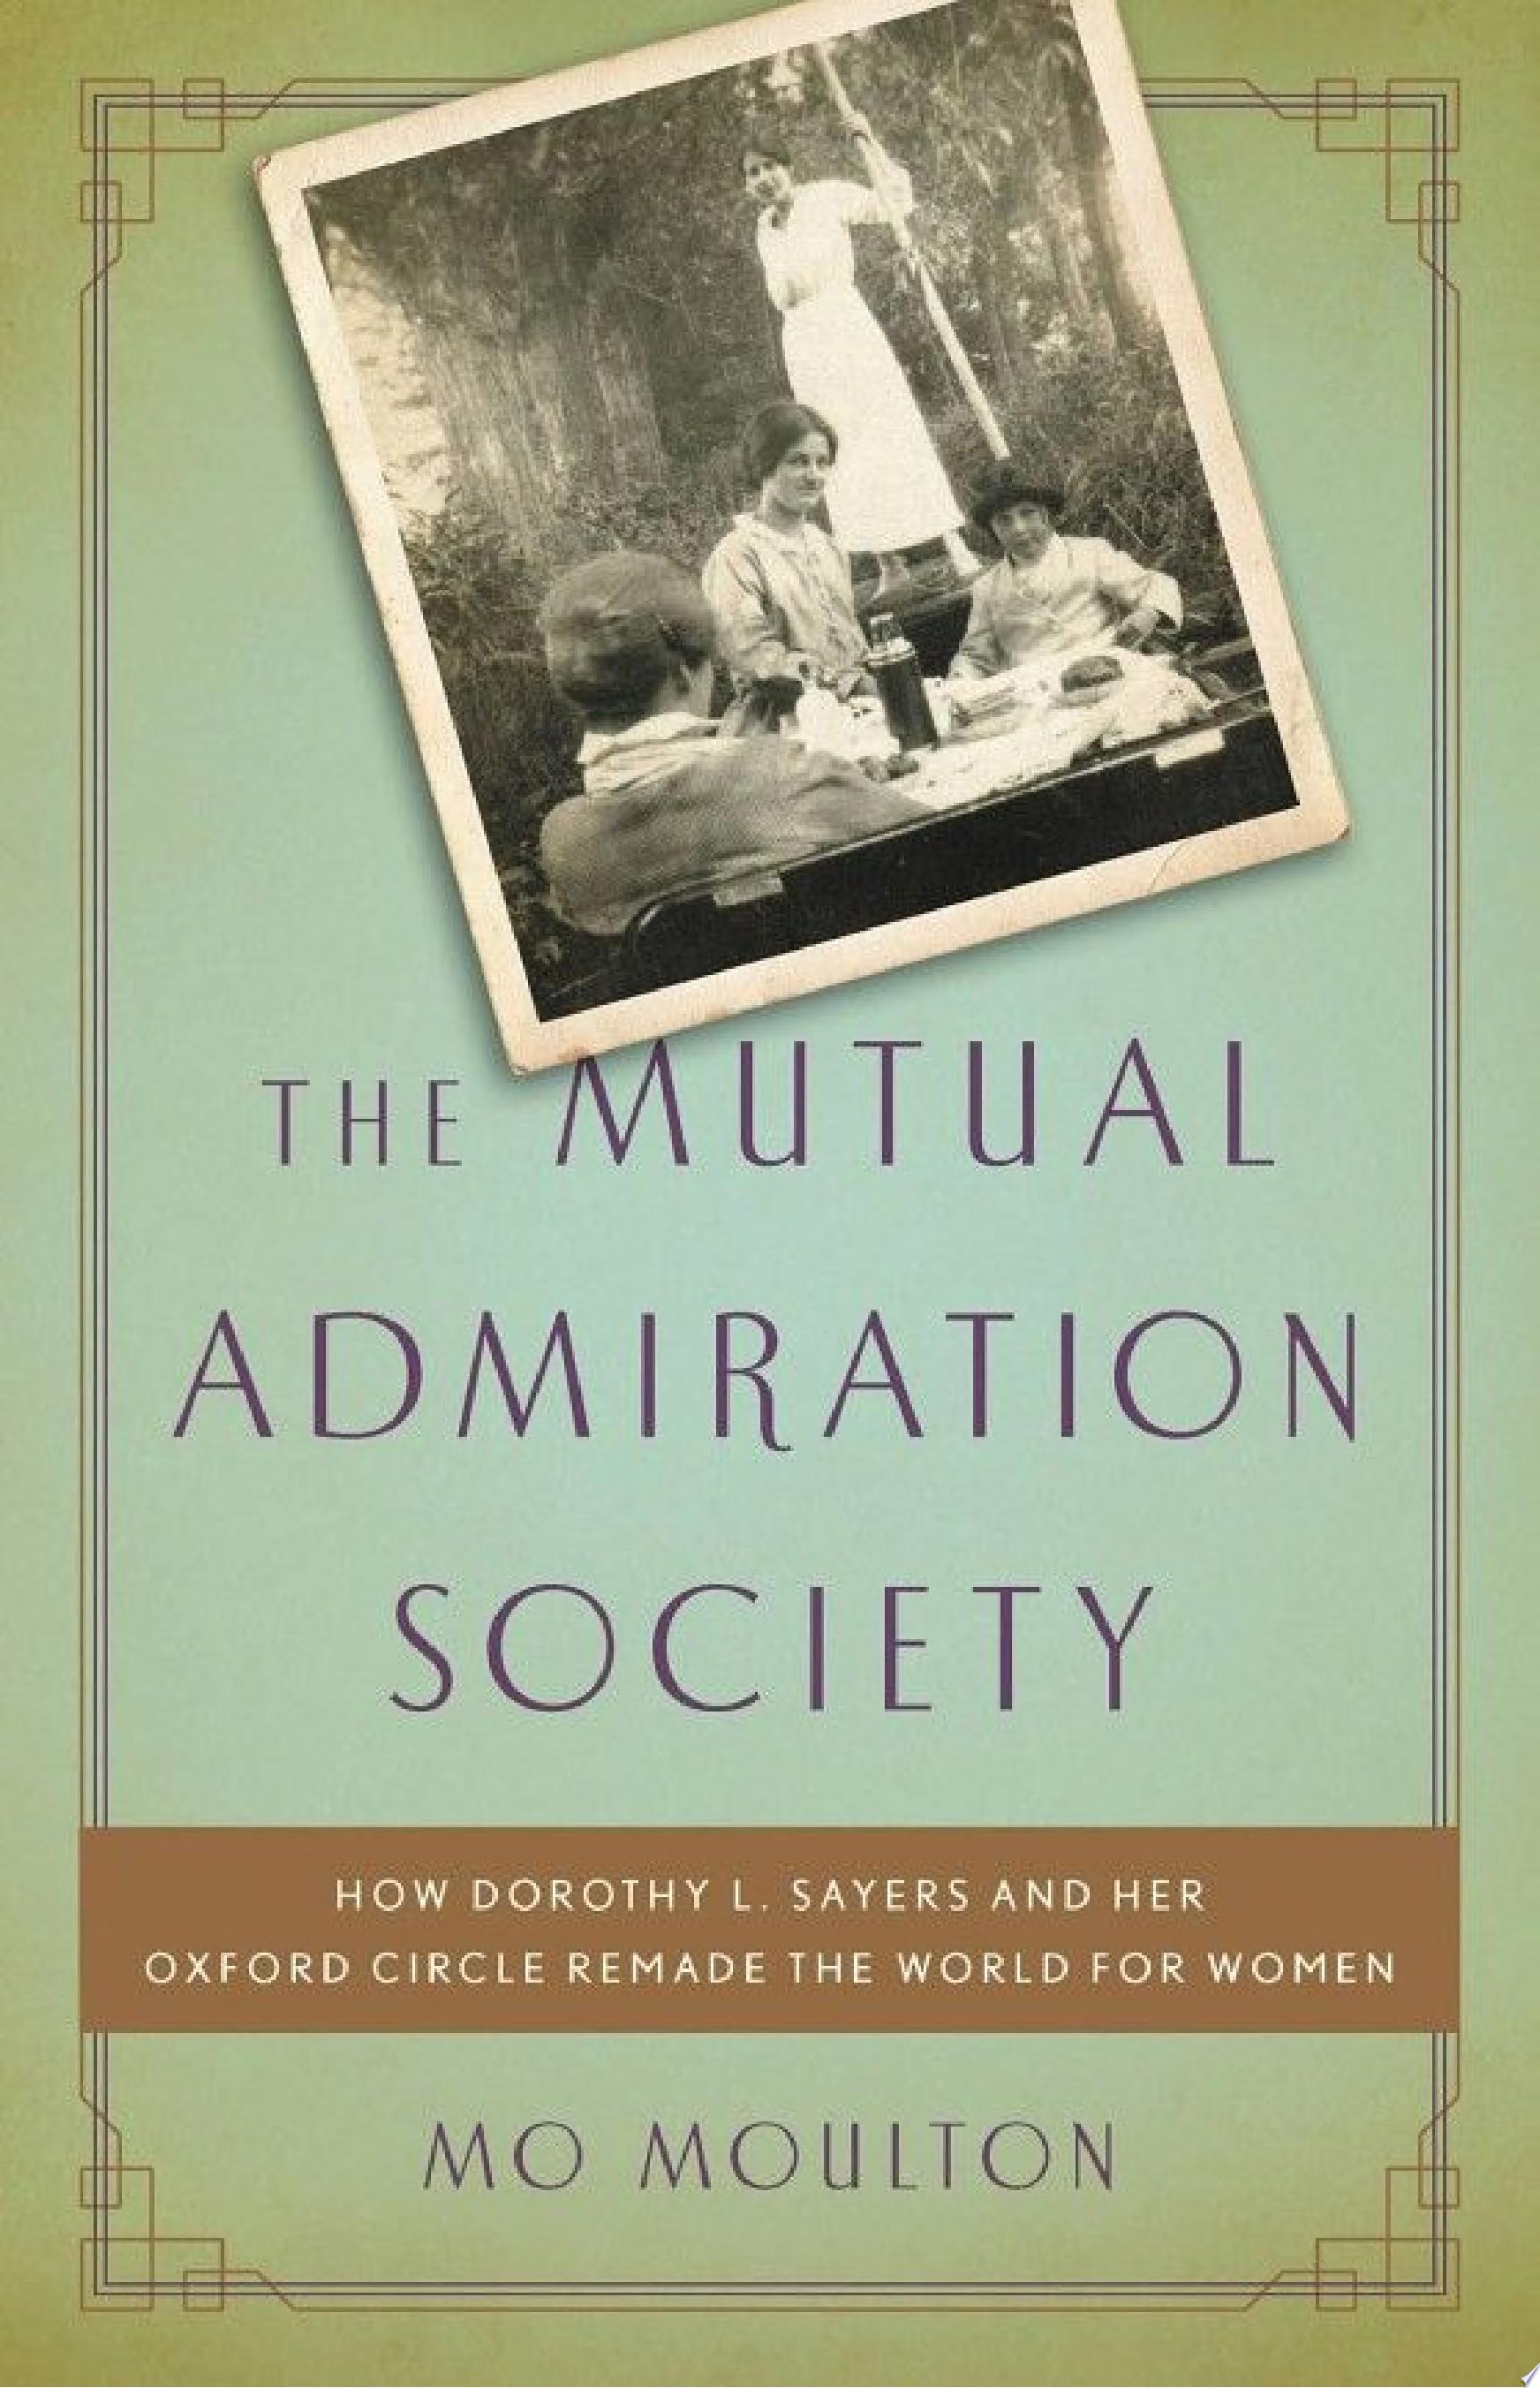 Image for "The Mutual Admiration Society"